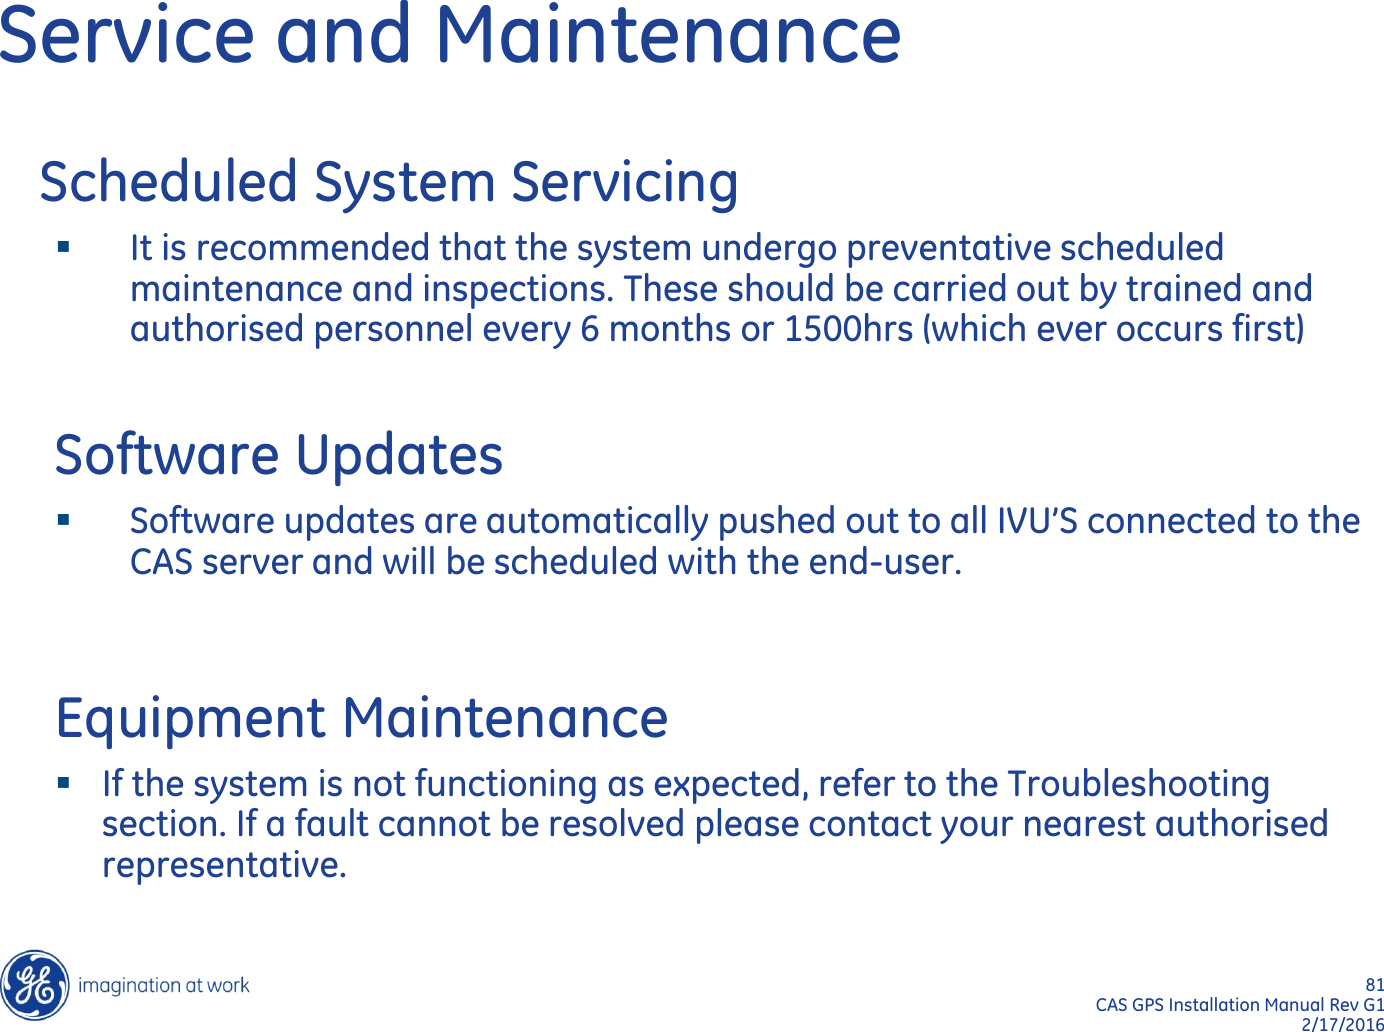 81  CAS GPS Installation Manual Rev G1 2/17/2016 Service and Maintenance    Scheduled System Servicing It is recommended that the system undergo preventative scheduled maintenance and inspections. These should be carried out by trained and authorised personnel every 6 months or 1500hrs (which ever occurs first)  Software Updates Software updates are automatically pushed out to all IVU’S connected to the CAS server and will be scheduled with the end-user.  Equipment Maintenance If the system is not functioning as expected, refer to the Troubleshooting section. If a fault cannot be resolved please contact your nearest authorised representative. 